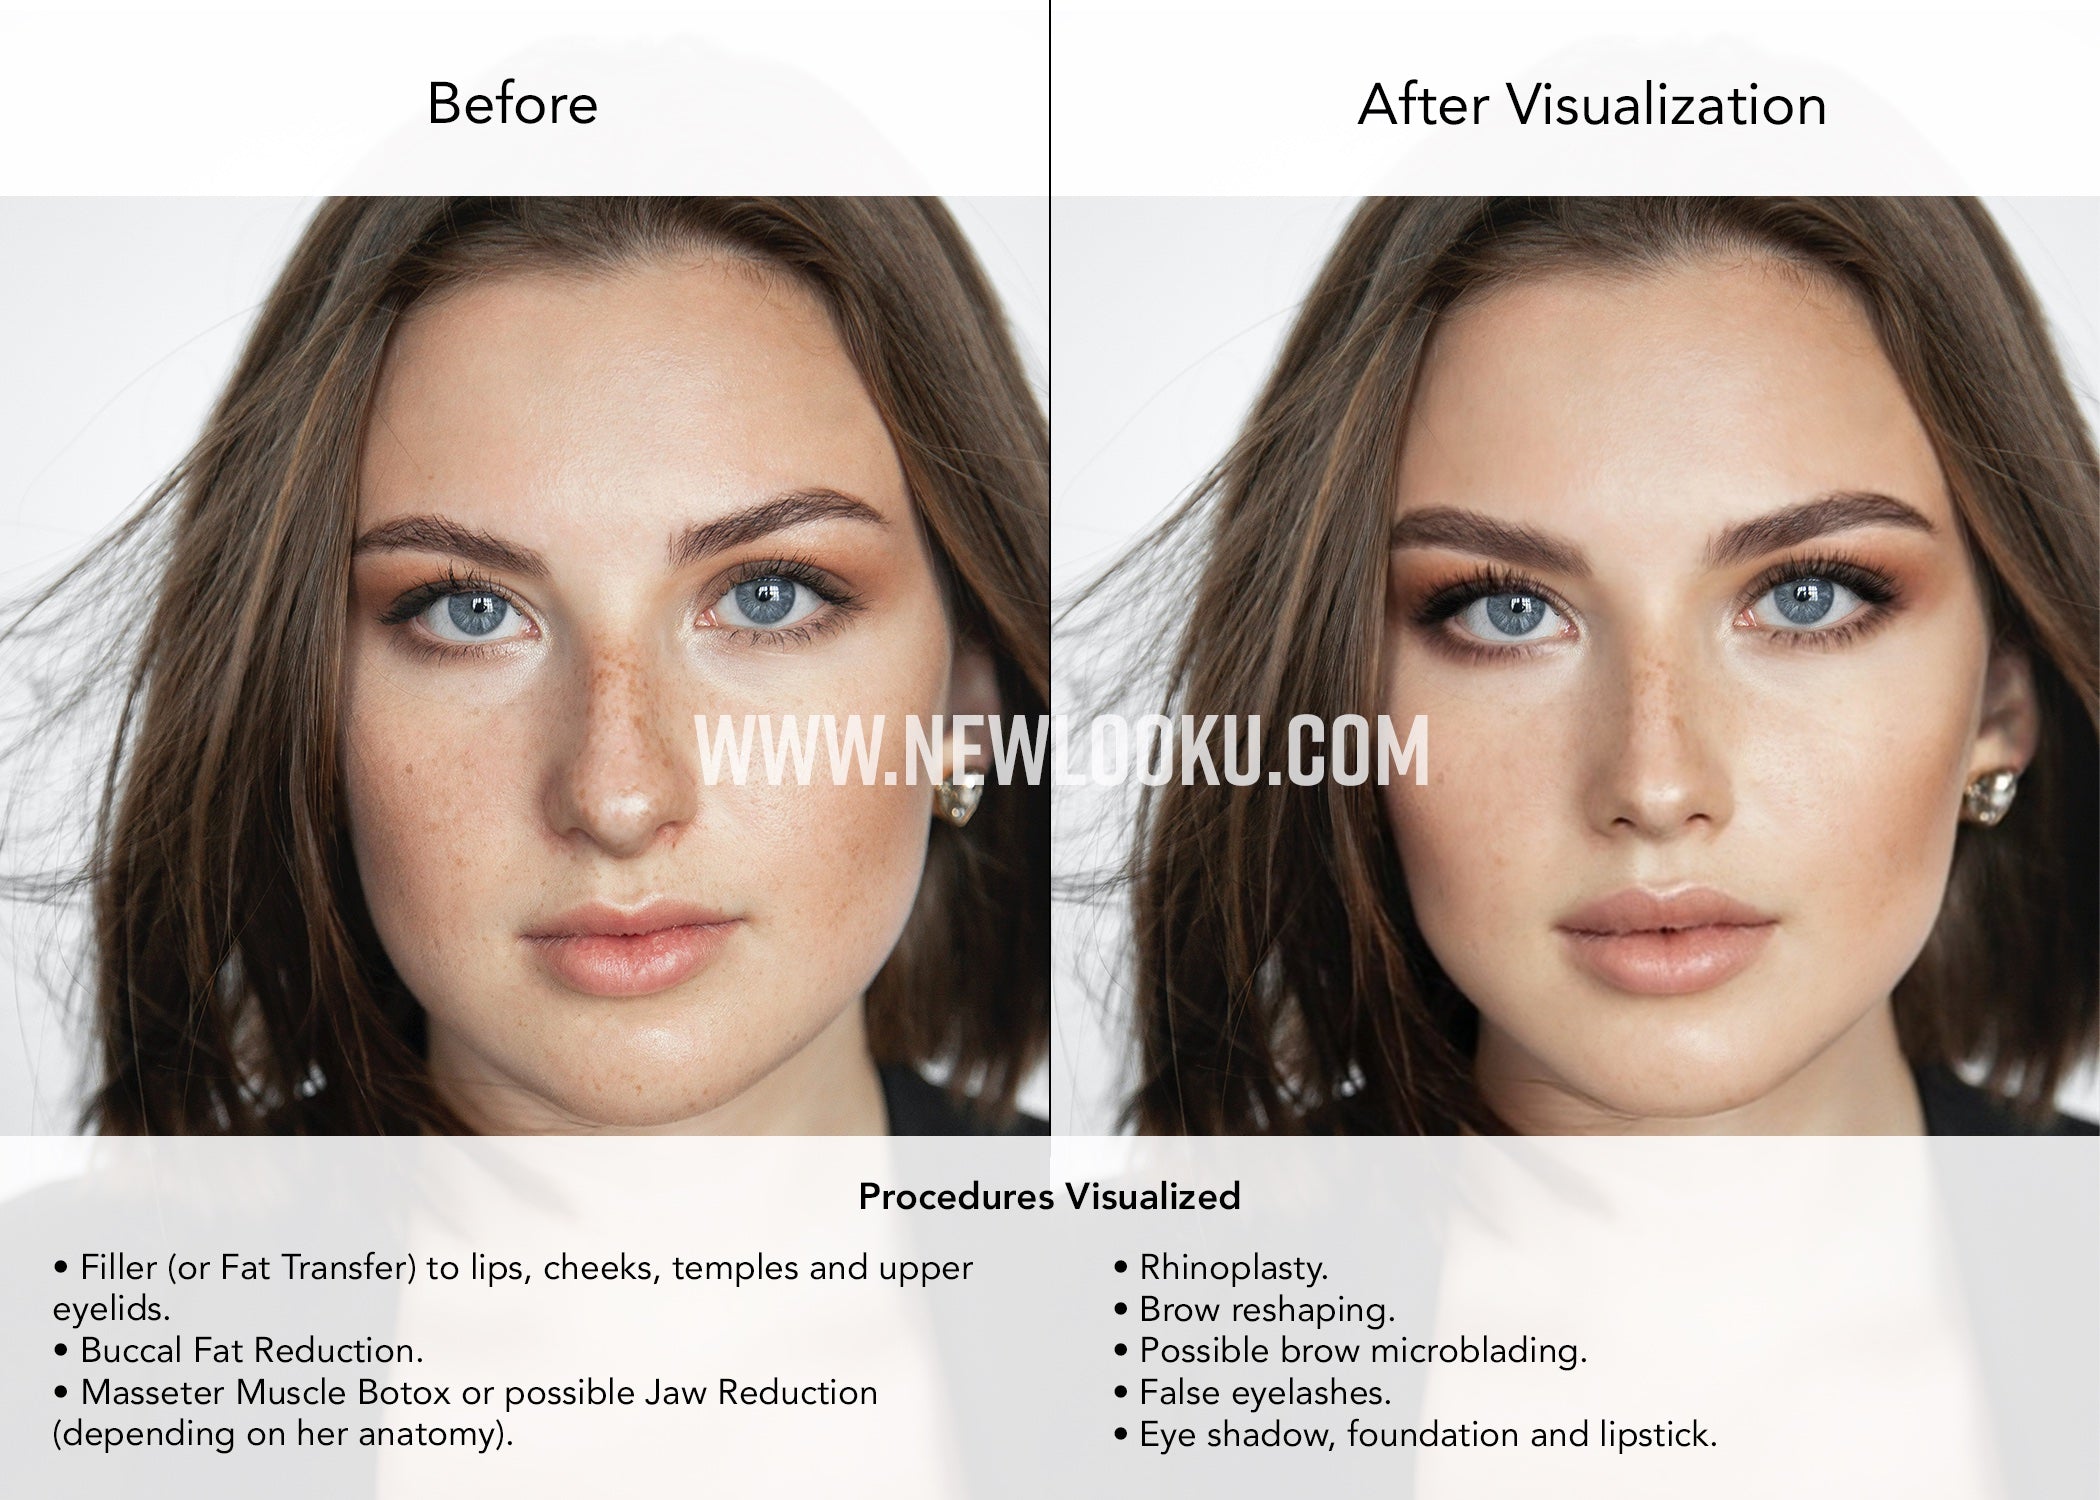 Female Plastic Surgery Visualization Before and After: Filler (or Fat Transfer) to lips, cheeks, temples and upper eyelids. Buccal Fat Reduction. Masseter Muscle Botox or possible Jaw Reduction. Rhinoplasty.